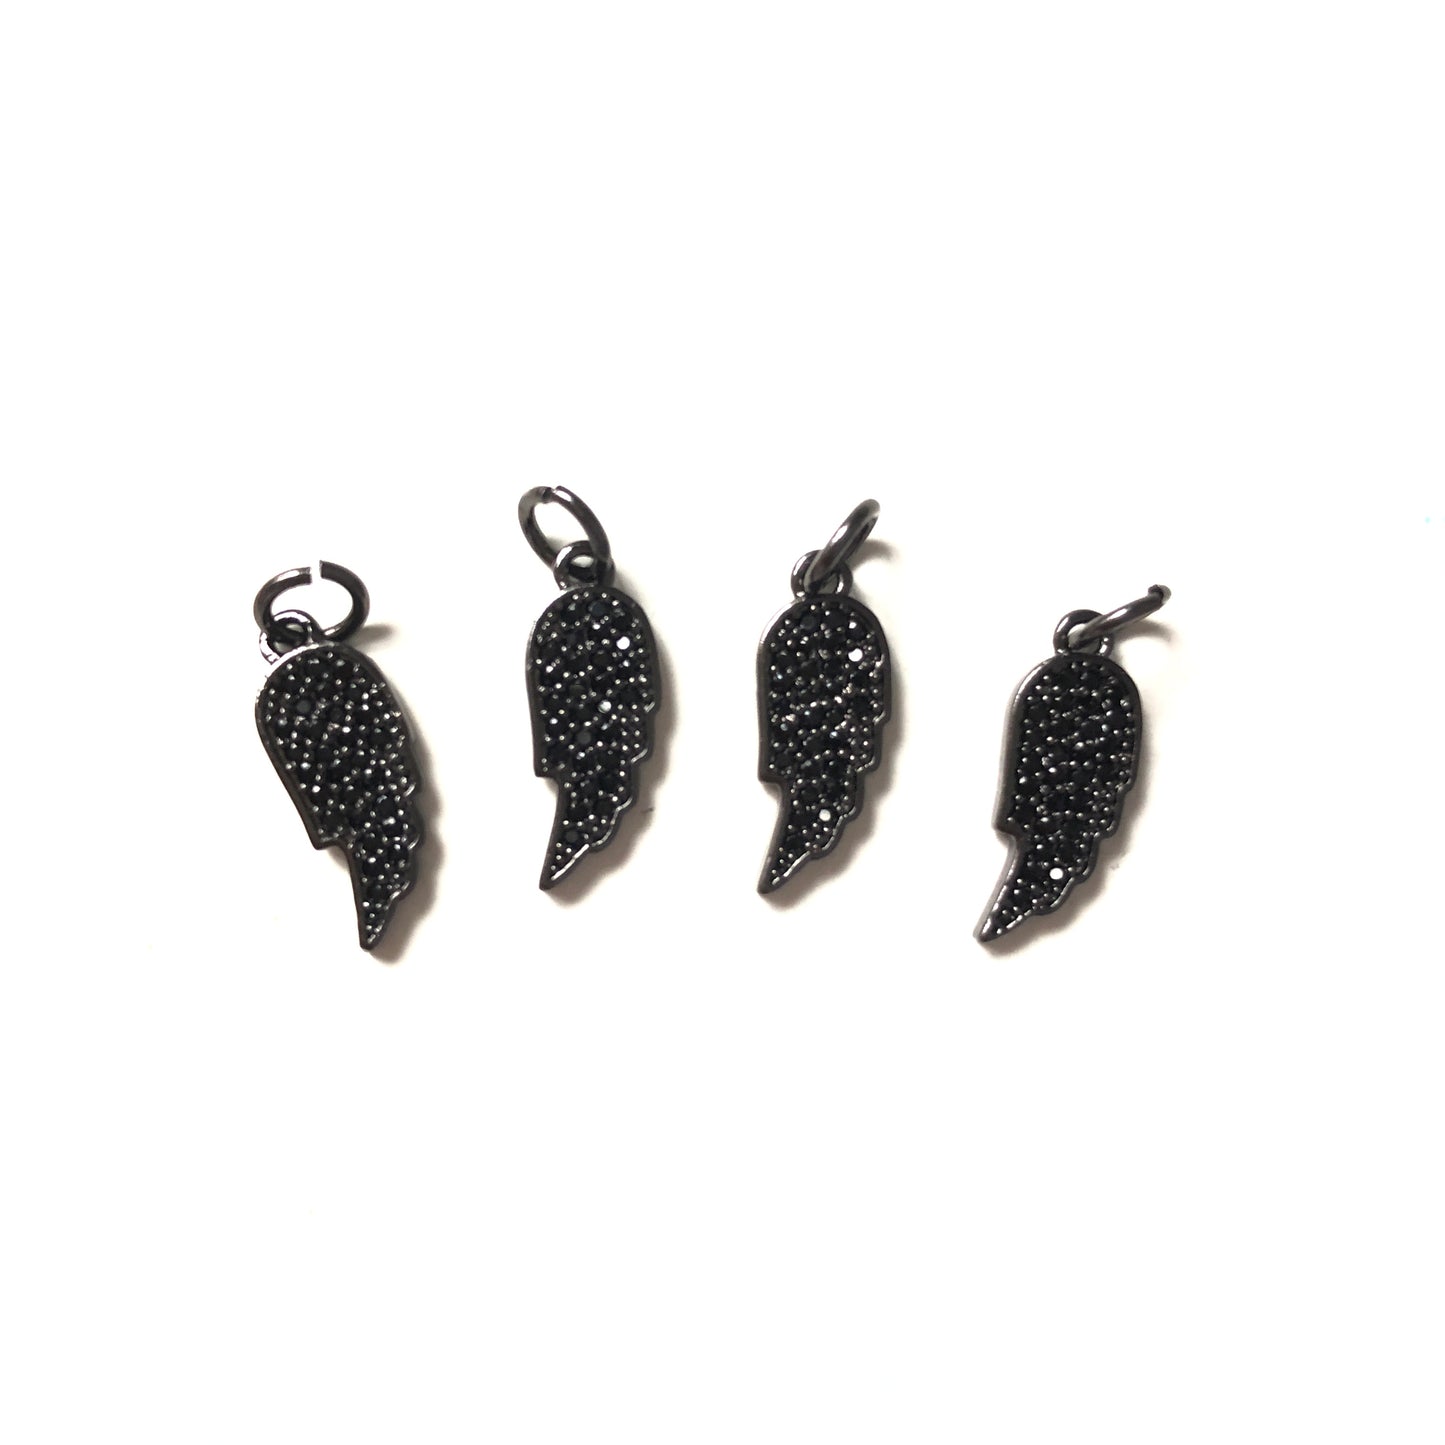 10pcs/lot 15*6mm CZ Paved Wing Charms Black CZ Paved Charms Small Sizes Wings Charms Beads Beyond